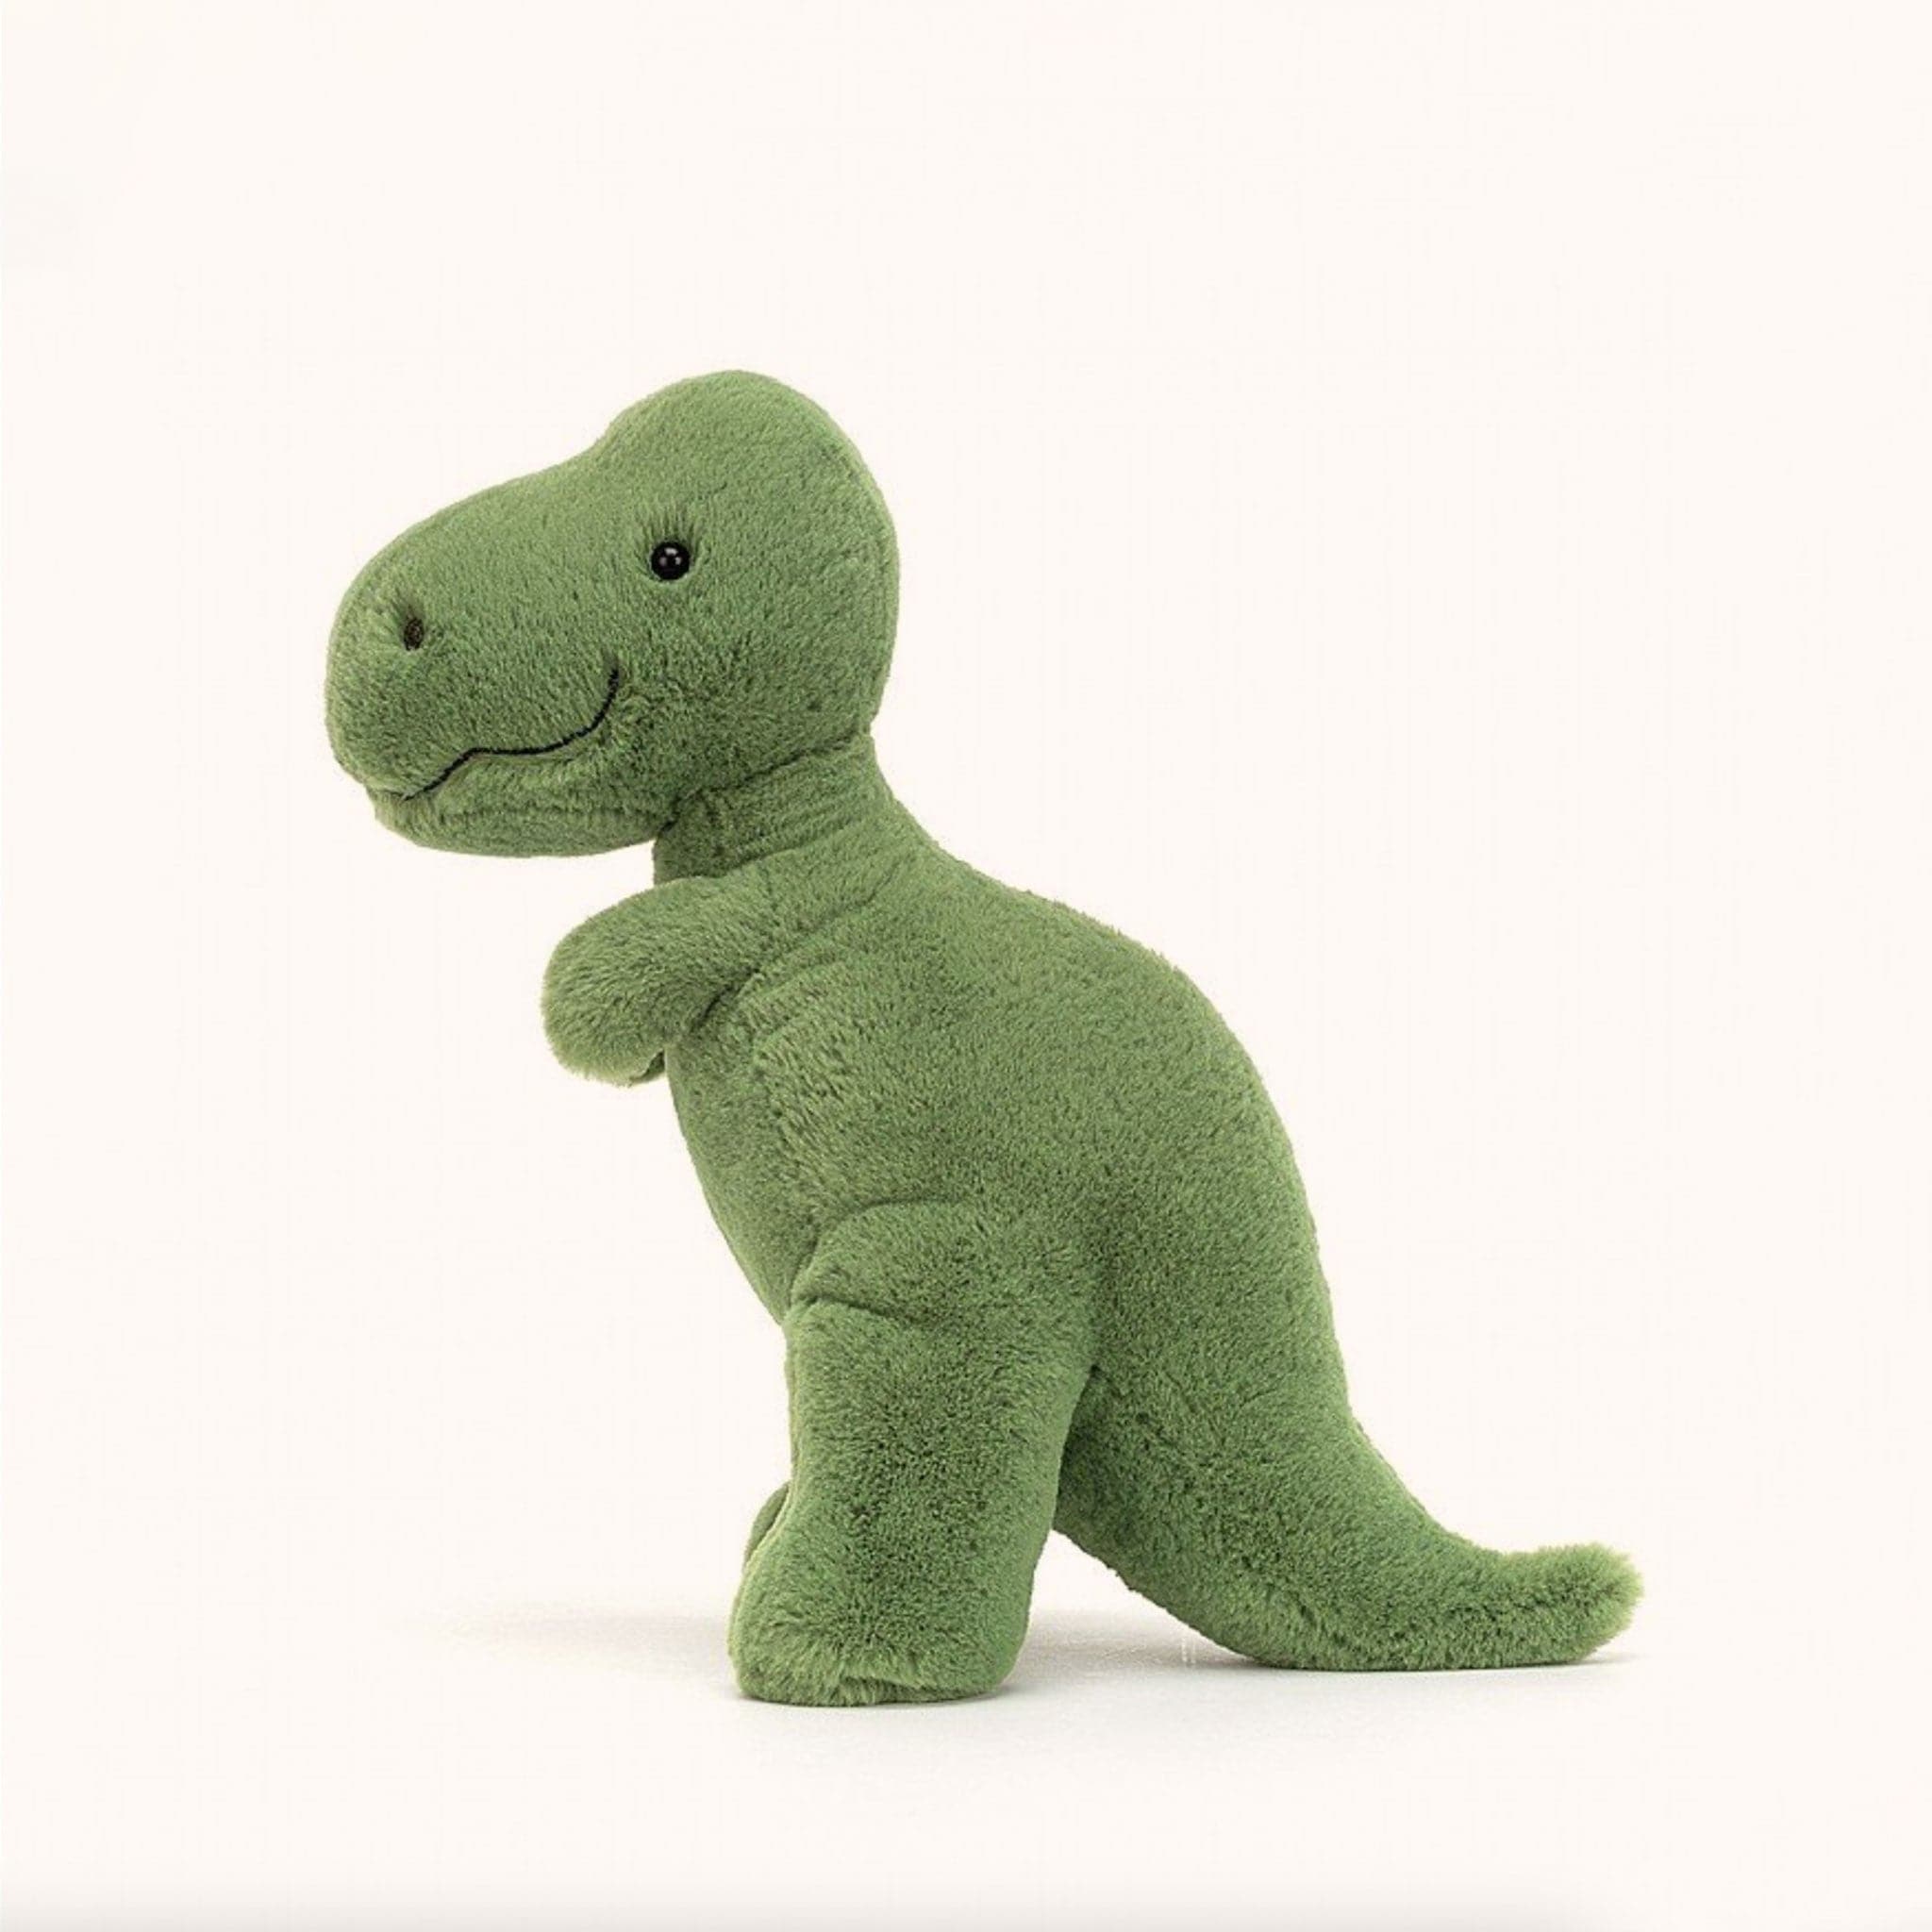 Soft stuffed animal in the shape of a green T-Rex.